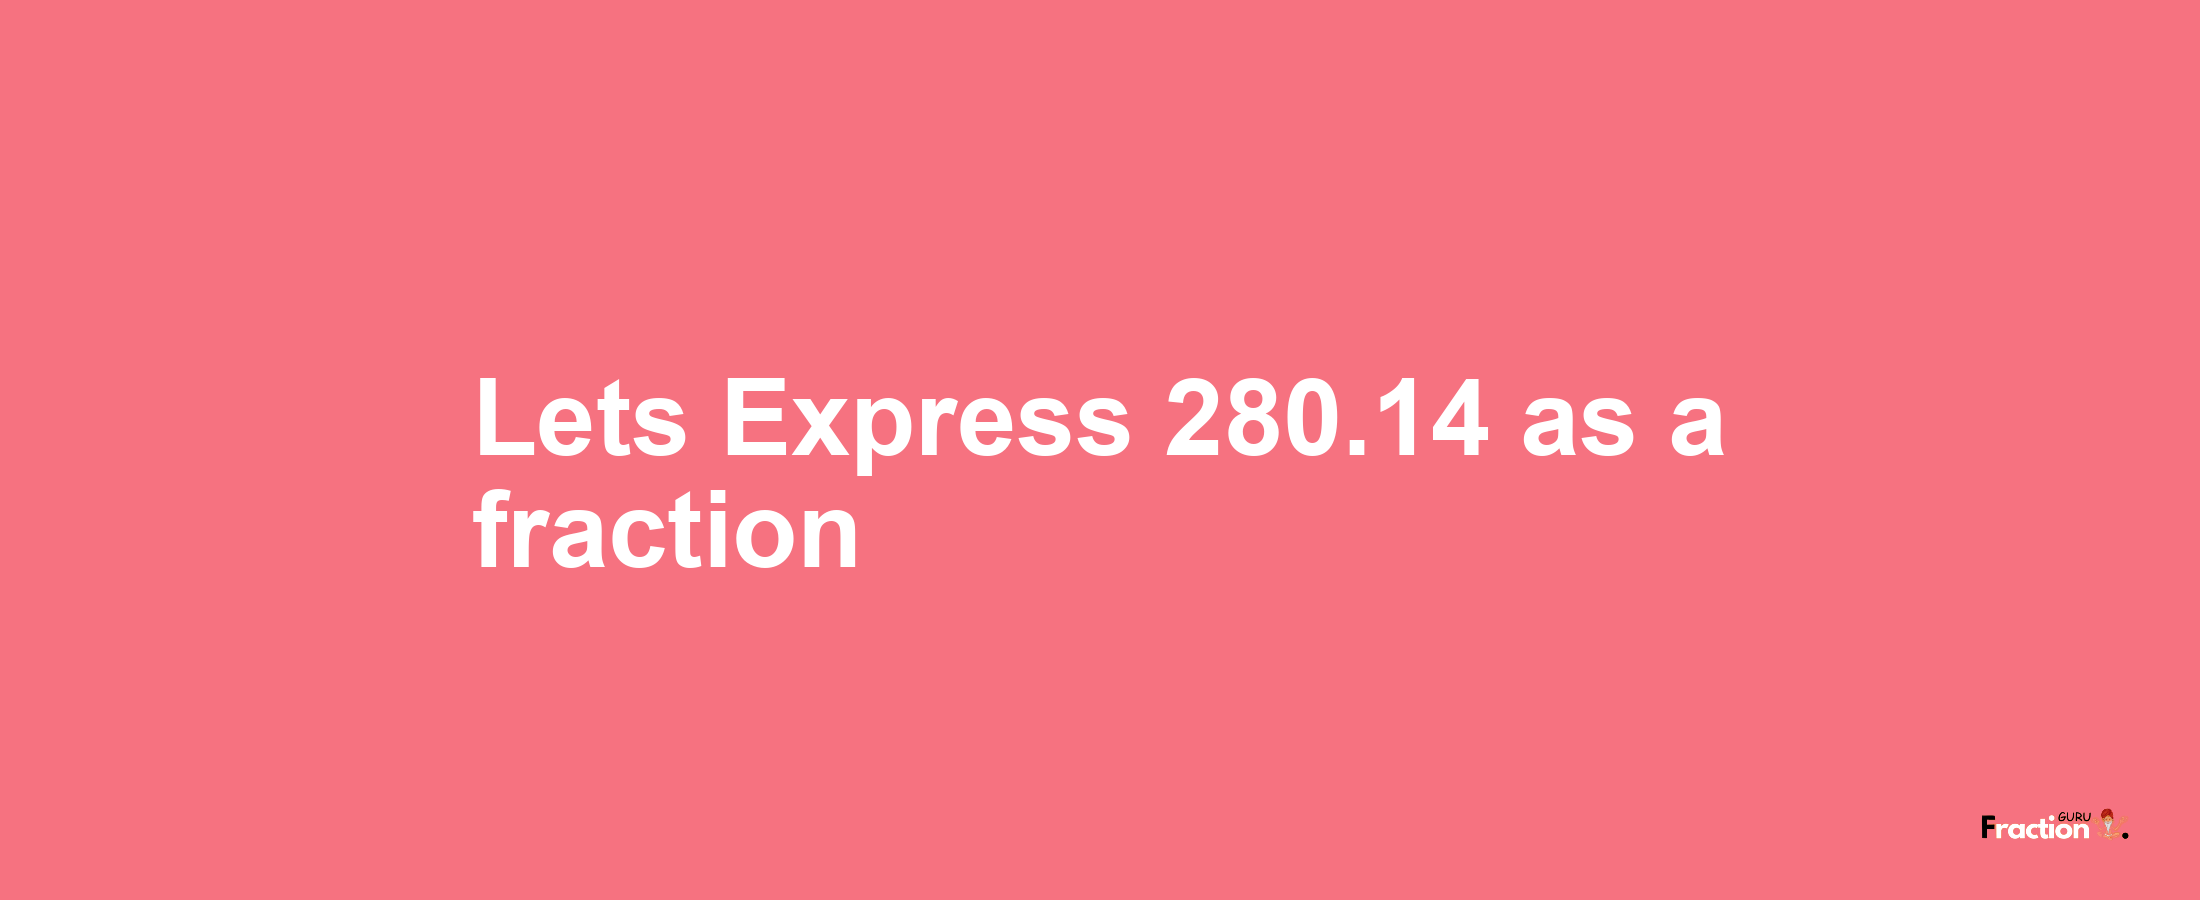 Lets Express 280.14 as afraction